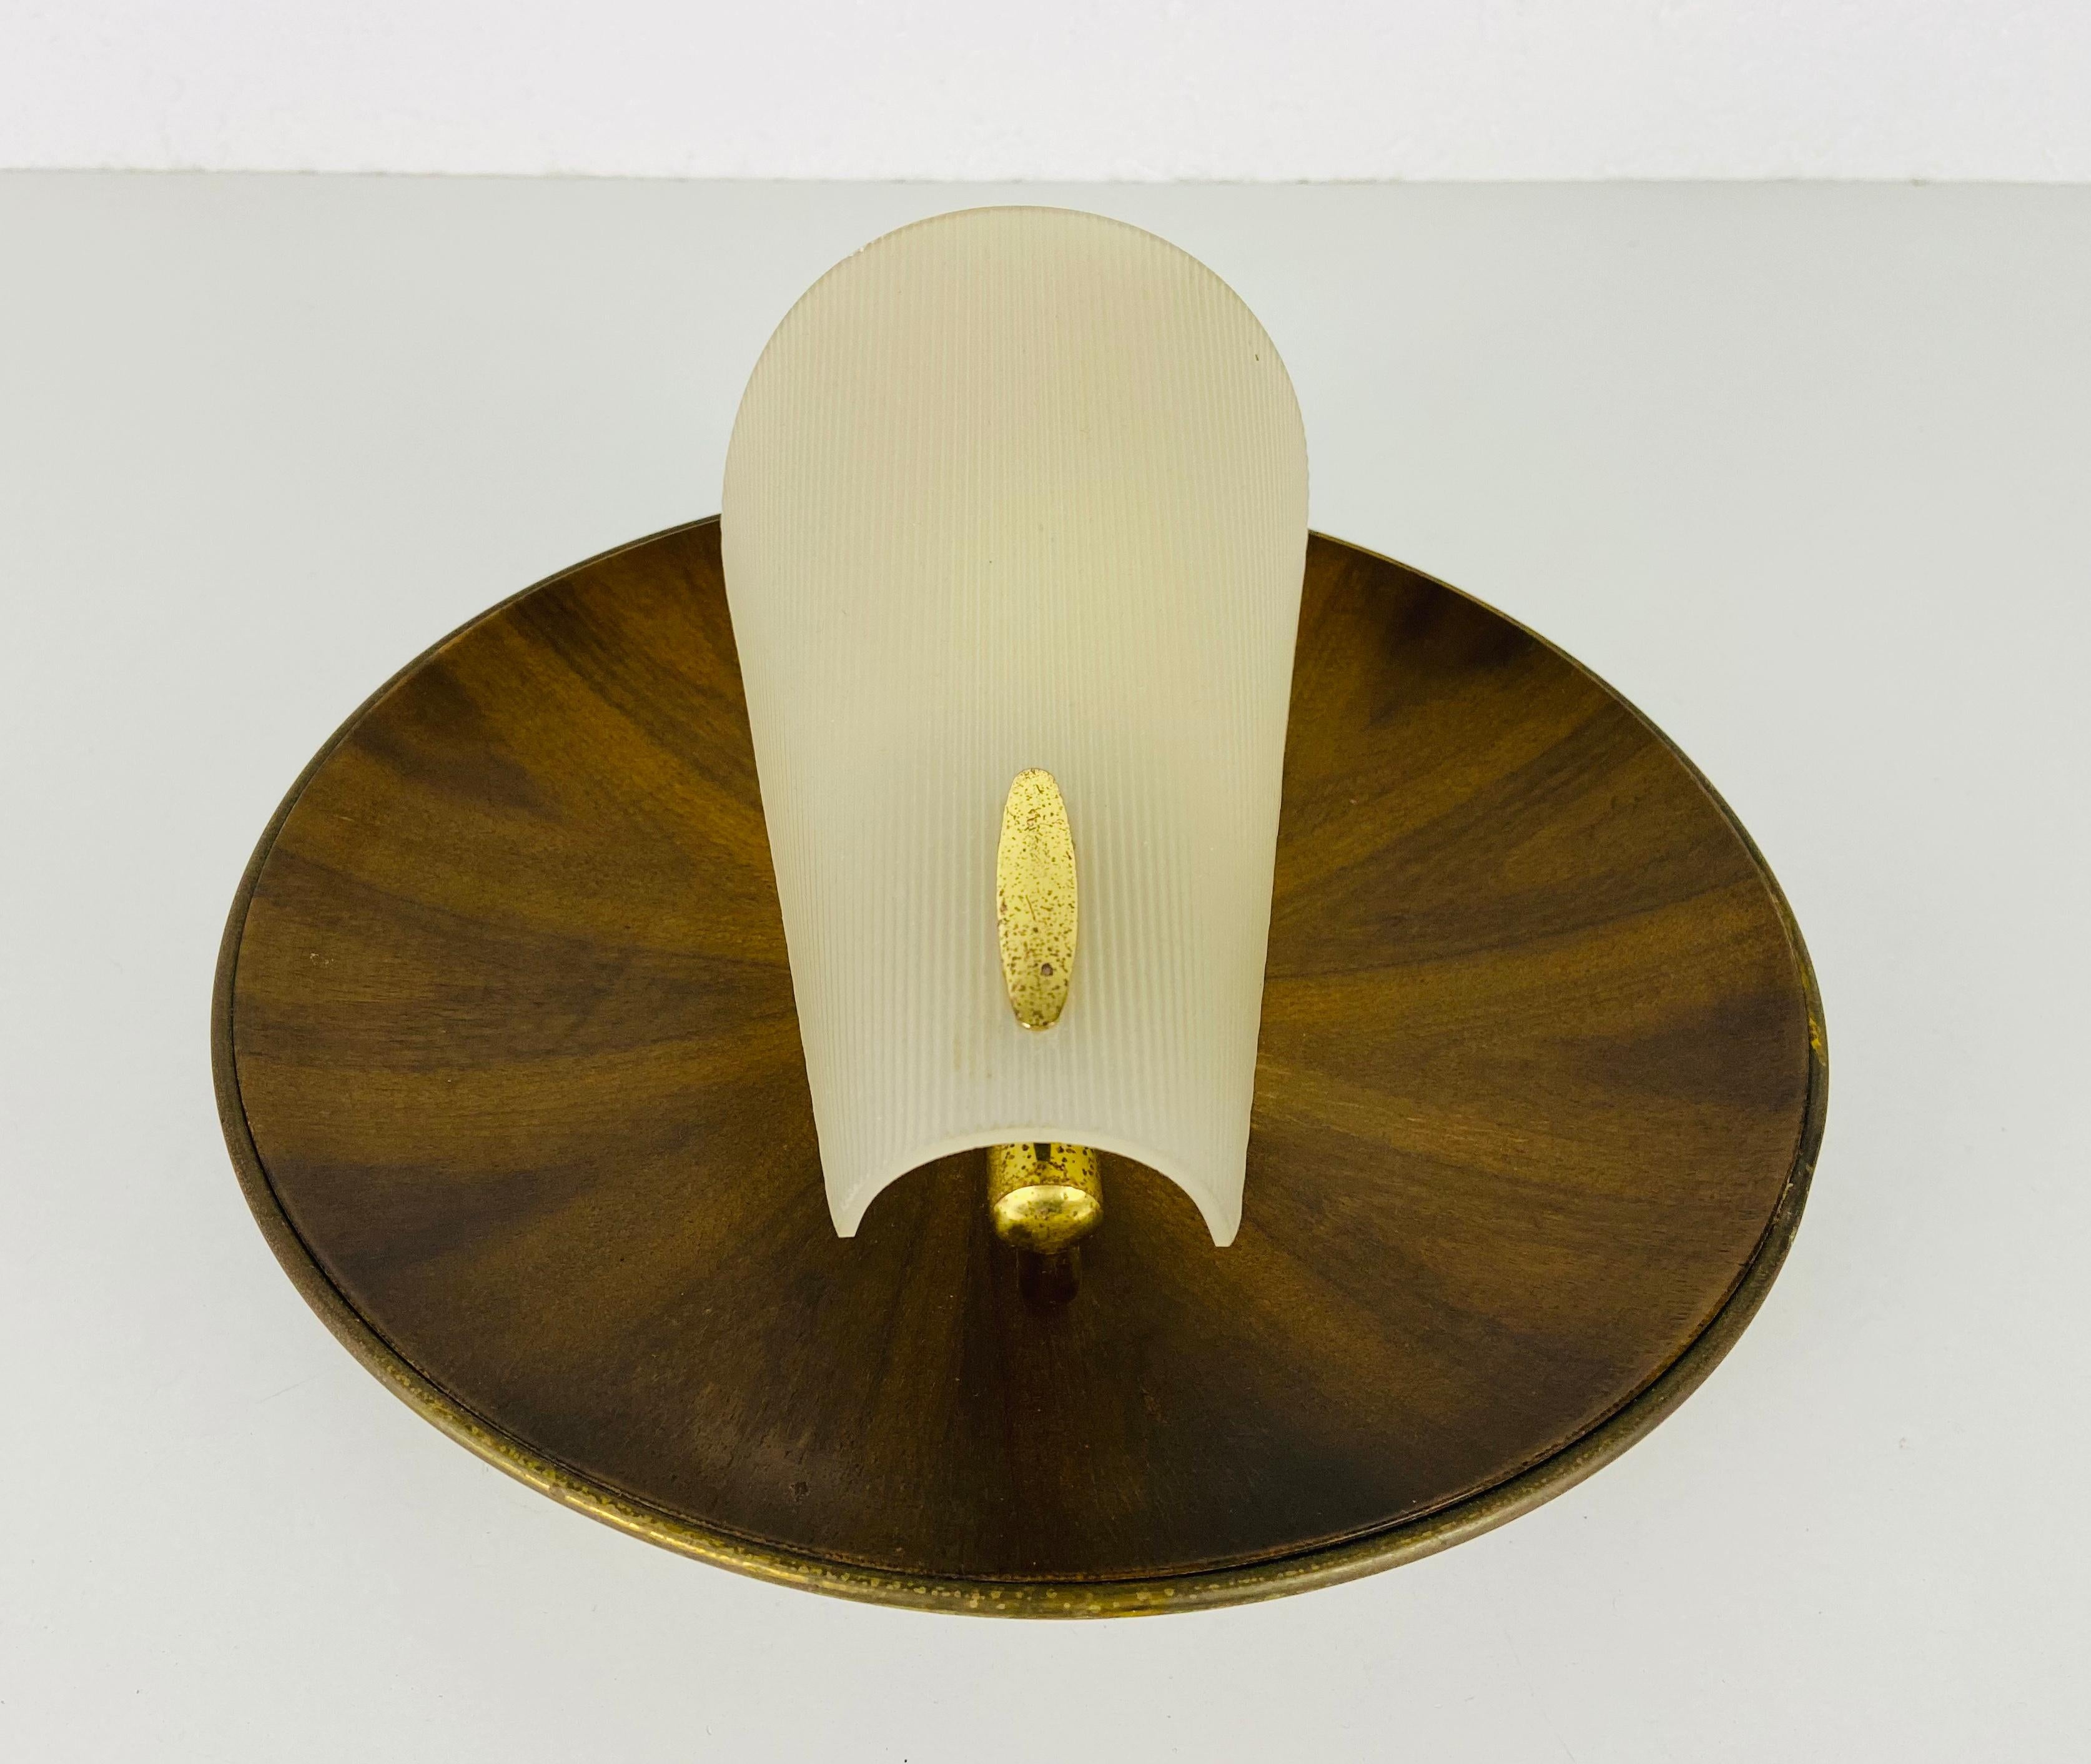 Italian Midcentury Teak and Plexi Glass Wall Lamp in the style of Stilnovo, Italy For Sale